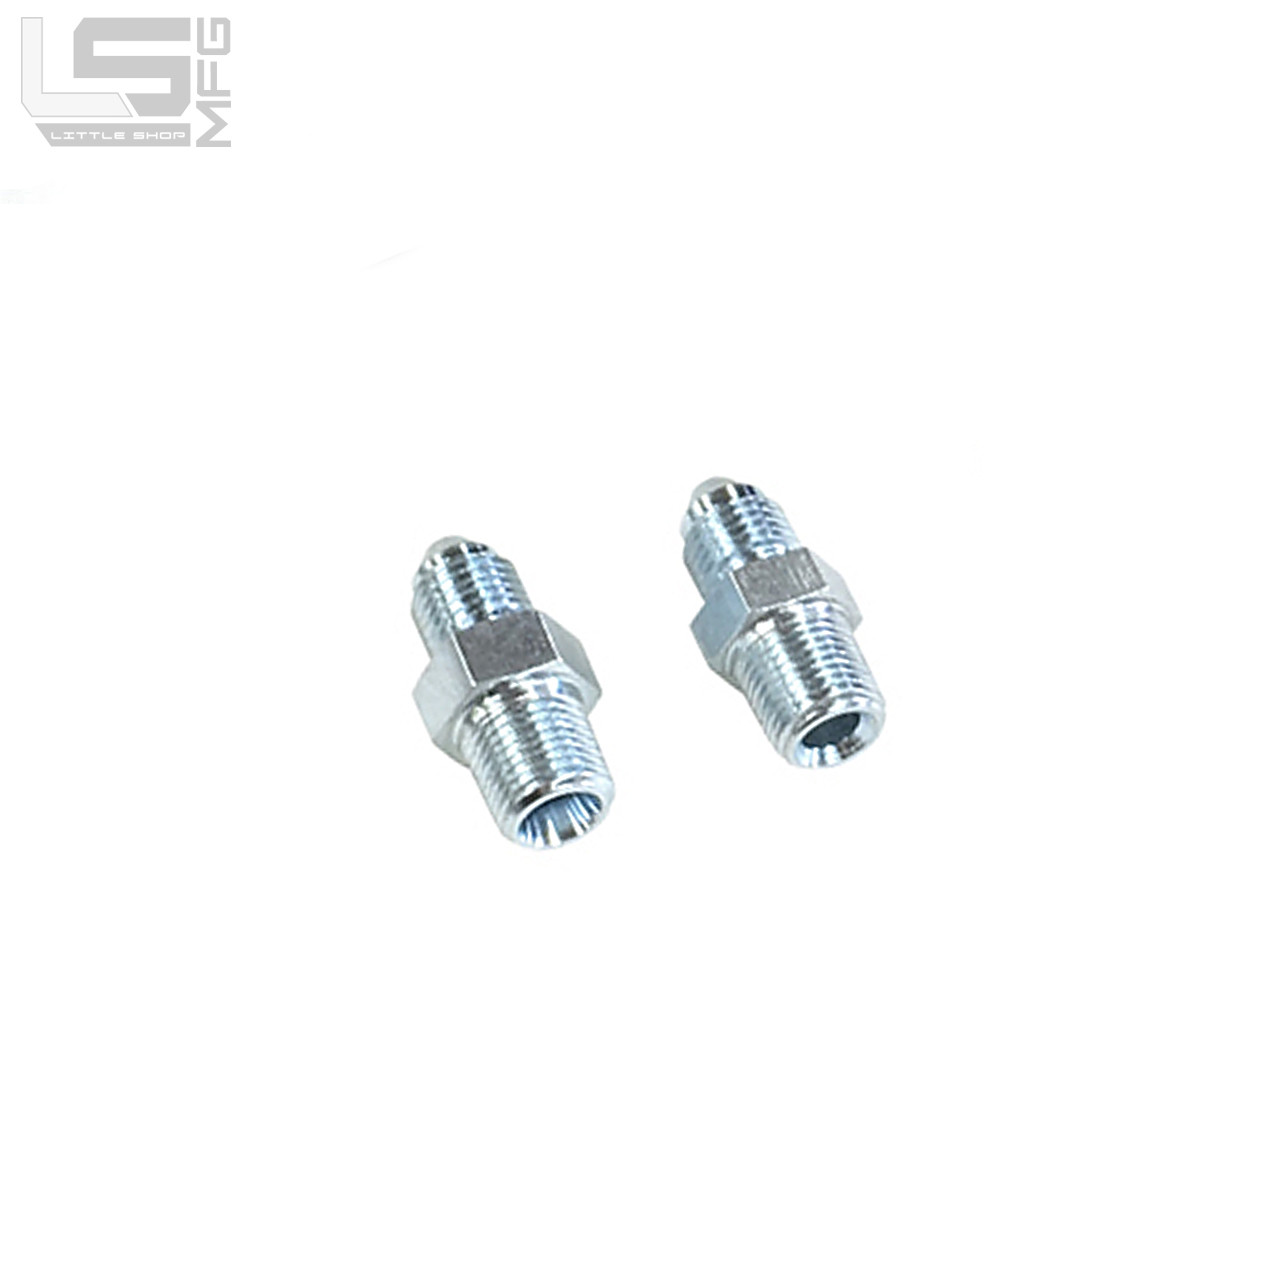 https://cdn11.bigcommerce.com/s-4nz22/images/stencil/1280x1280/products/387/2294/1500-C1500-BBK-front-line-kit-adapter-fittings__84644.1642621056.jpg?c=2